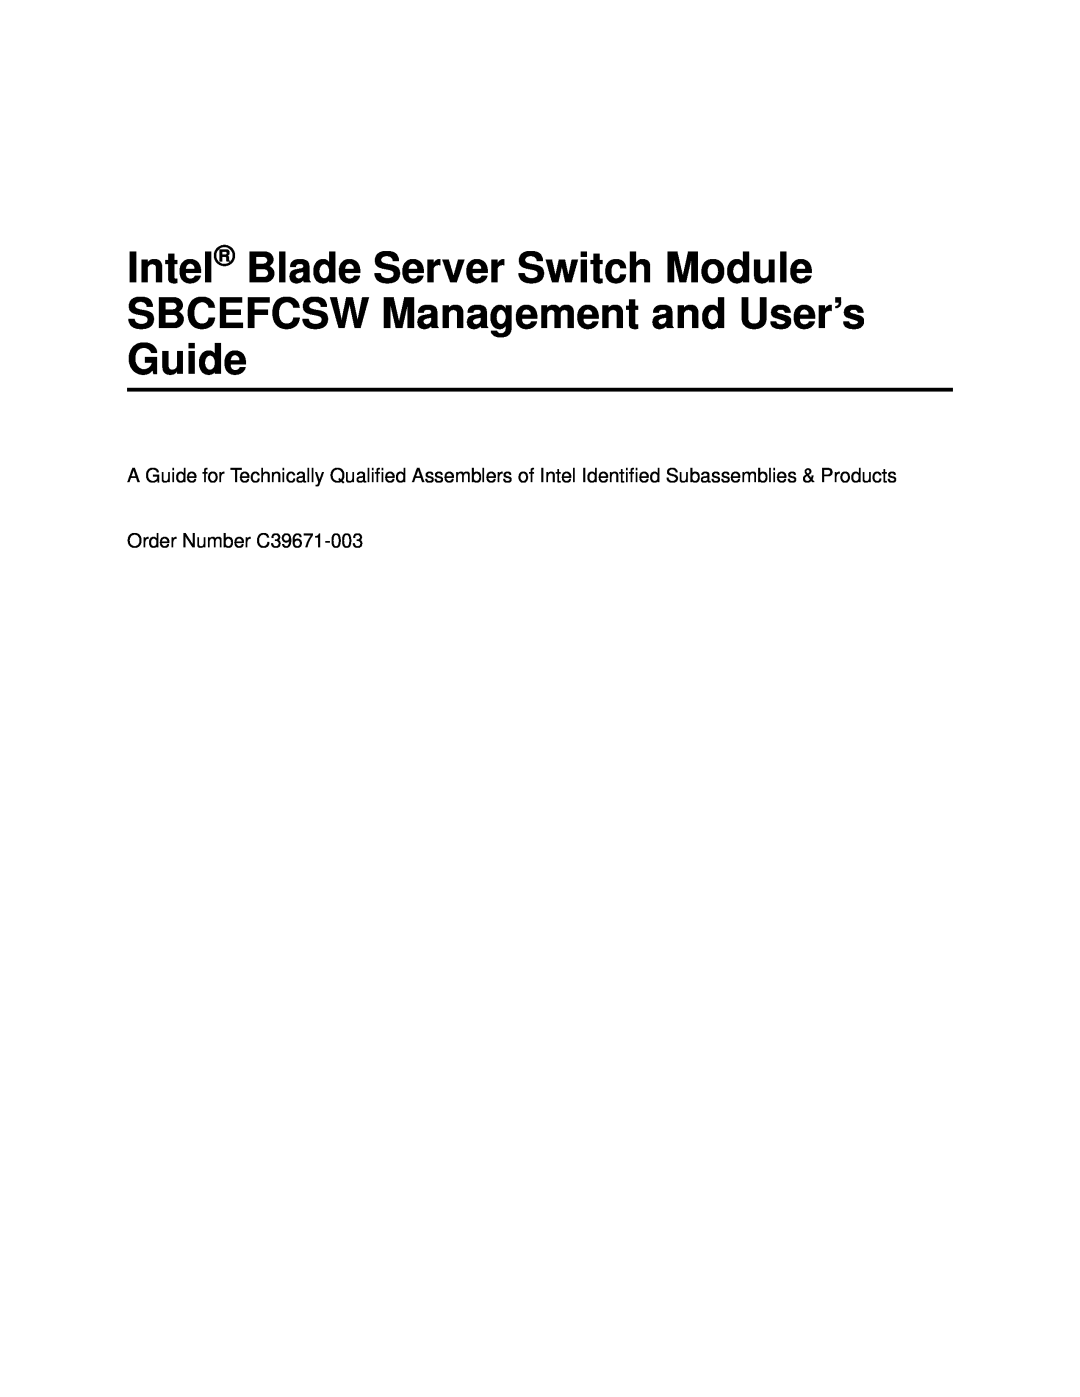 Intel manual Intel Blade Server Switch Module, SBCEFCSW Management and User’s Guide, Order Number C39671-003 